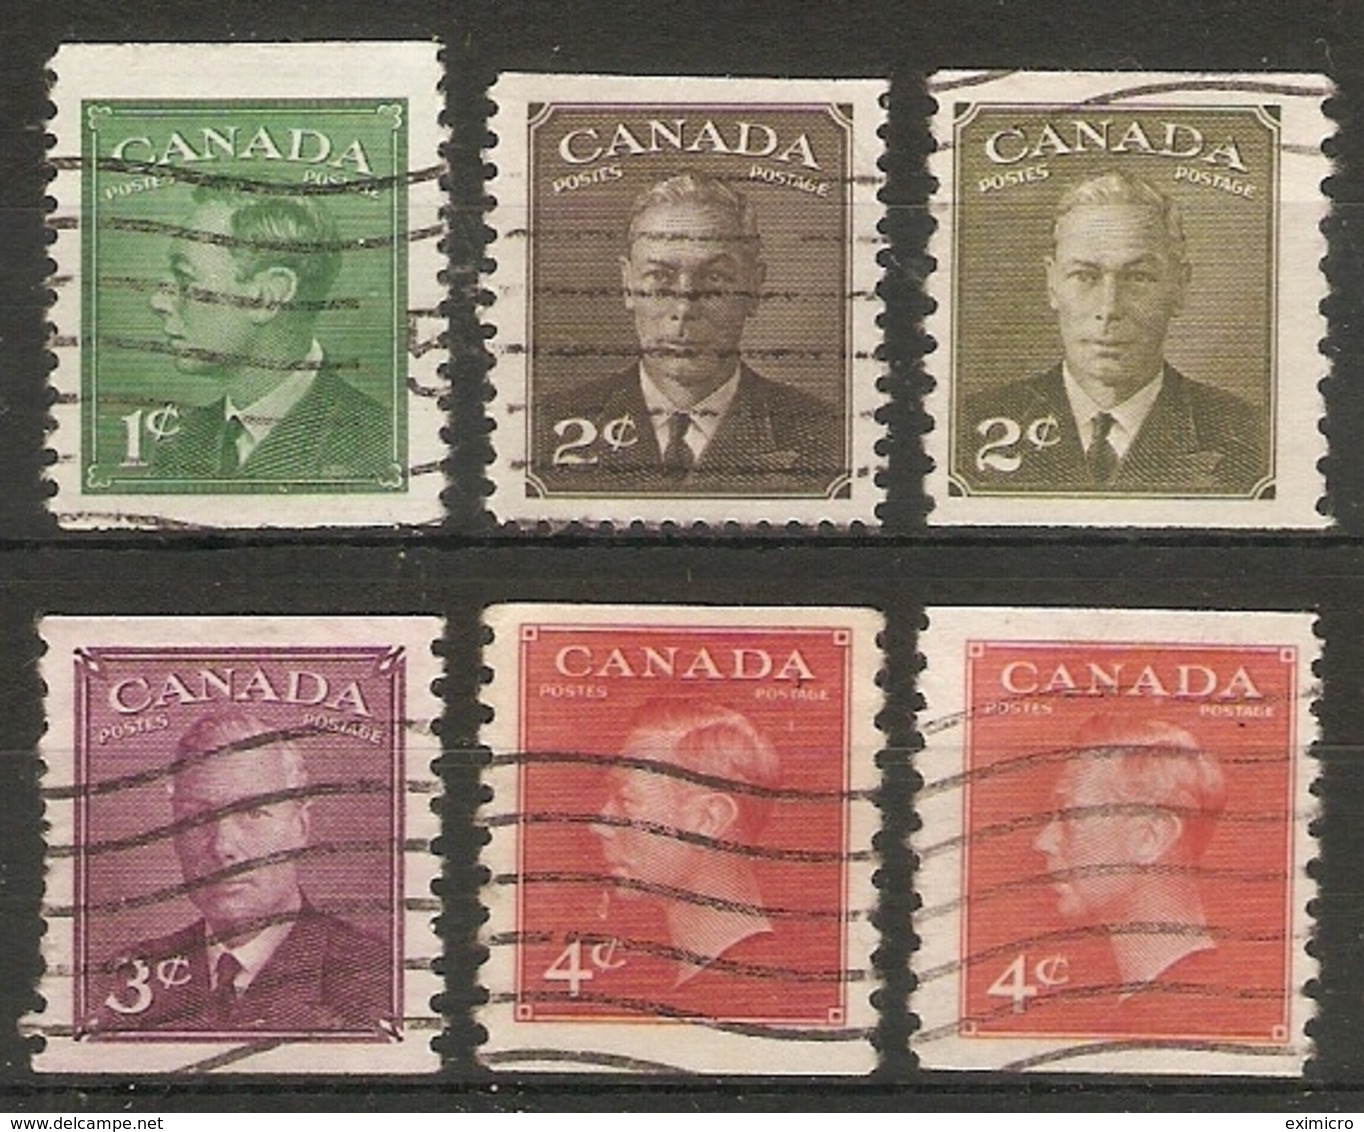 CANADA 1950 - 1951 SET OF 6 COIL STAMPS SG 419/422a IMPERF X PERF 9½ FINE USED Cat £30 - Used Stamps